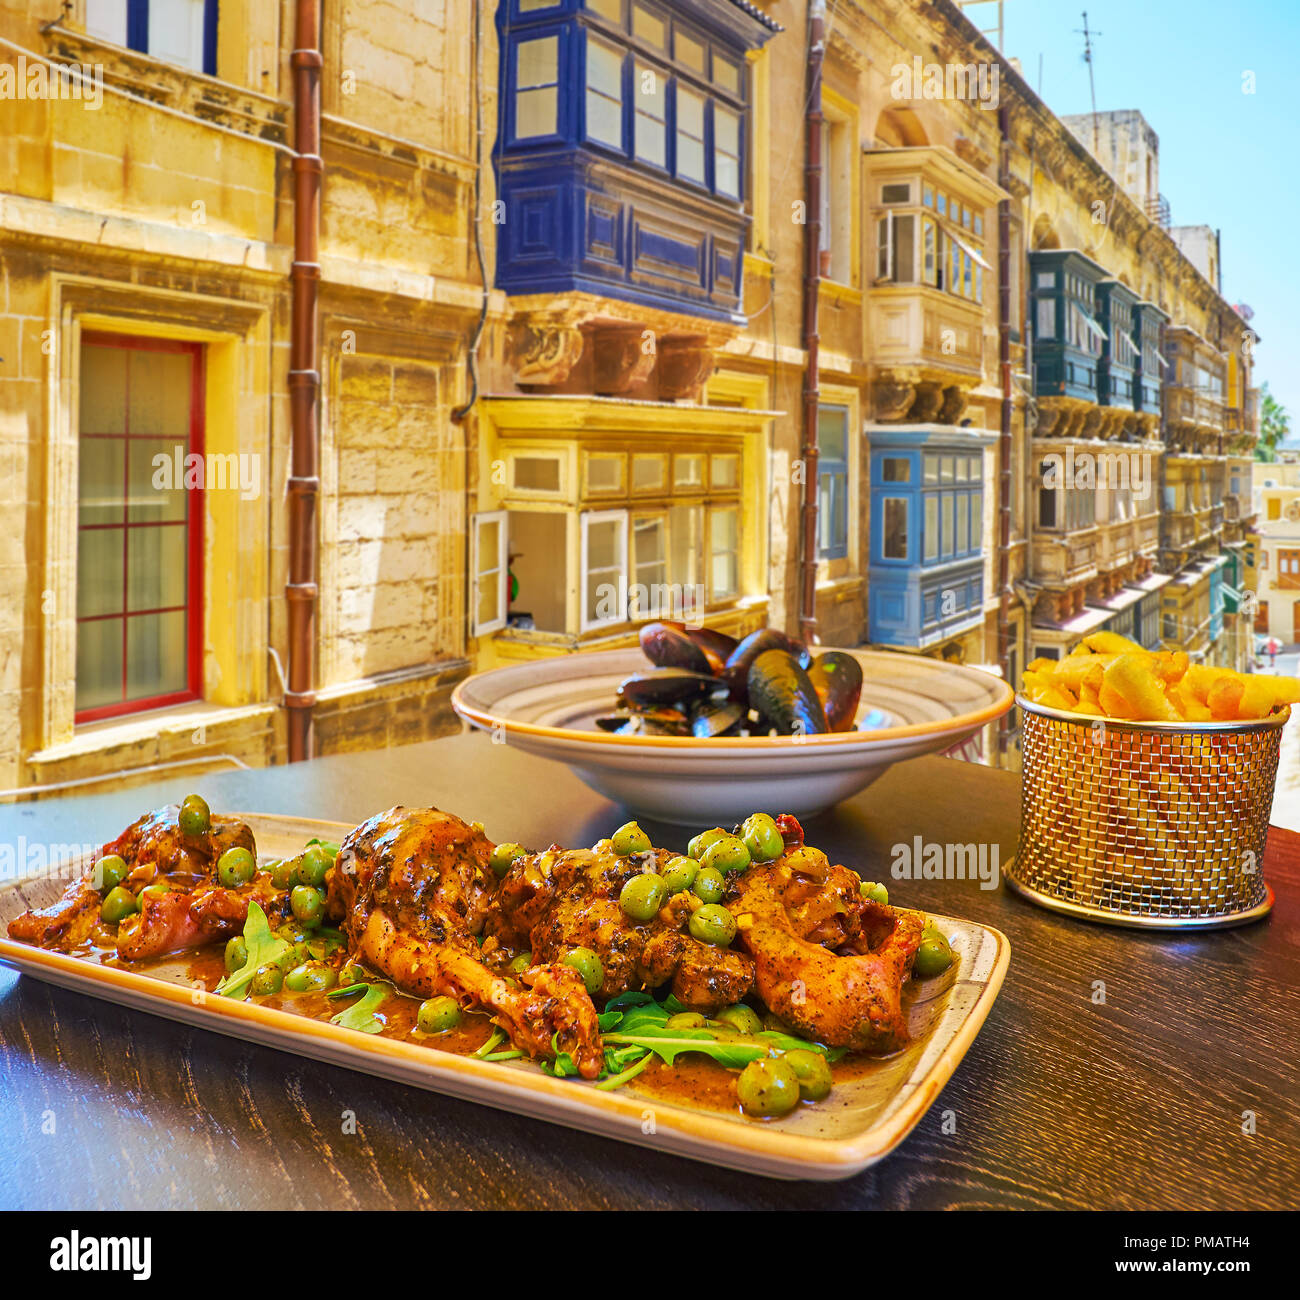 The restaurants of Strait street are best place to enjoy the famous rabbit stew, french fries, mussels and other traditional dishes of Maltese cuisine Stock Photo